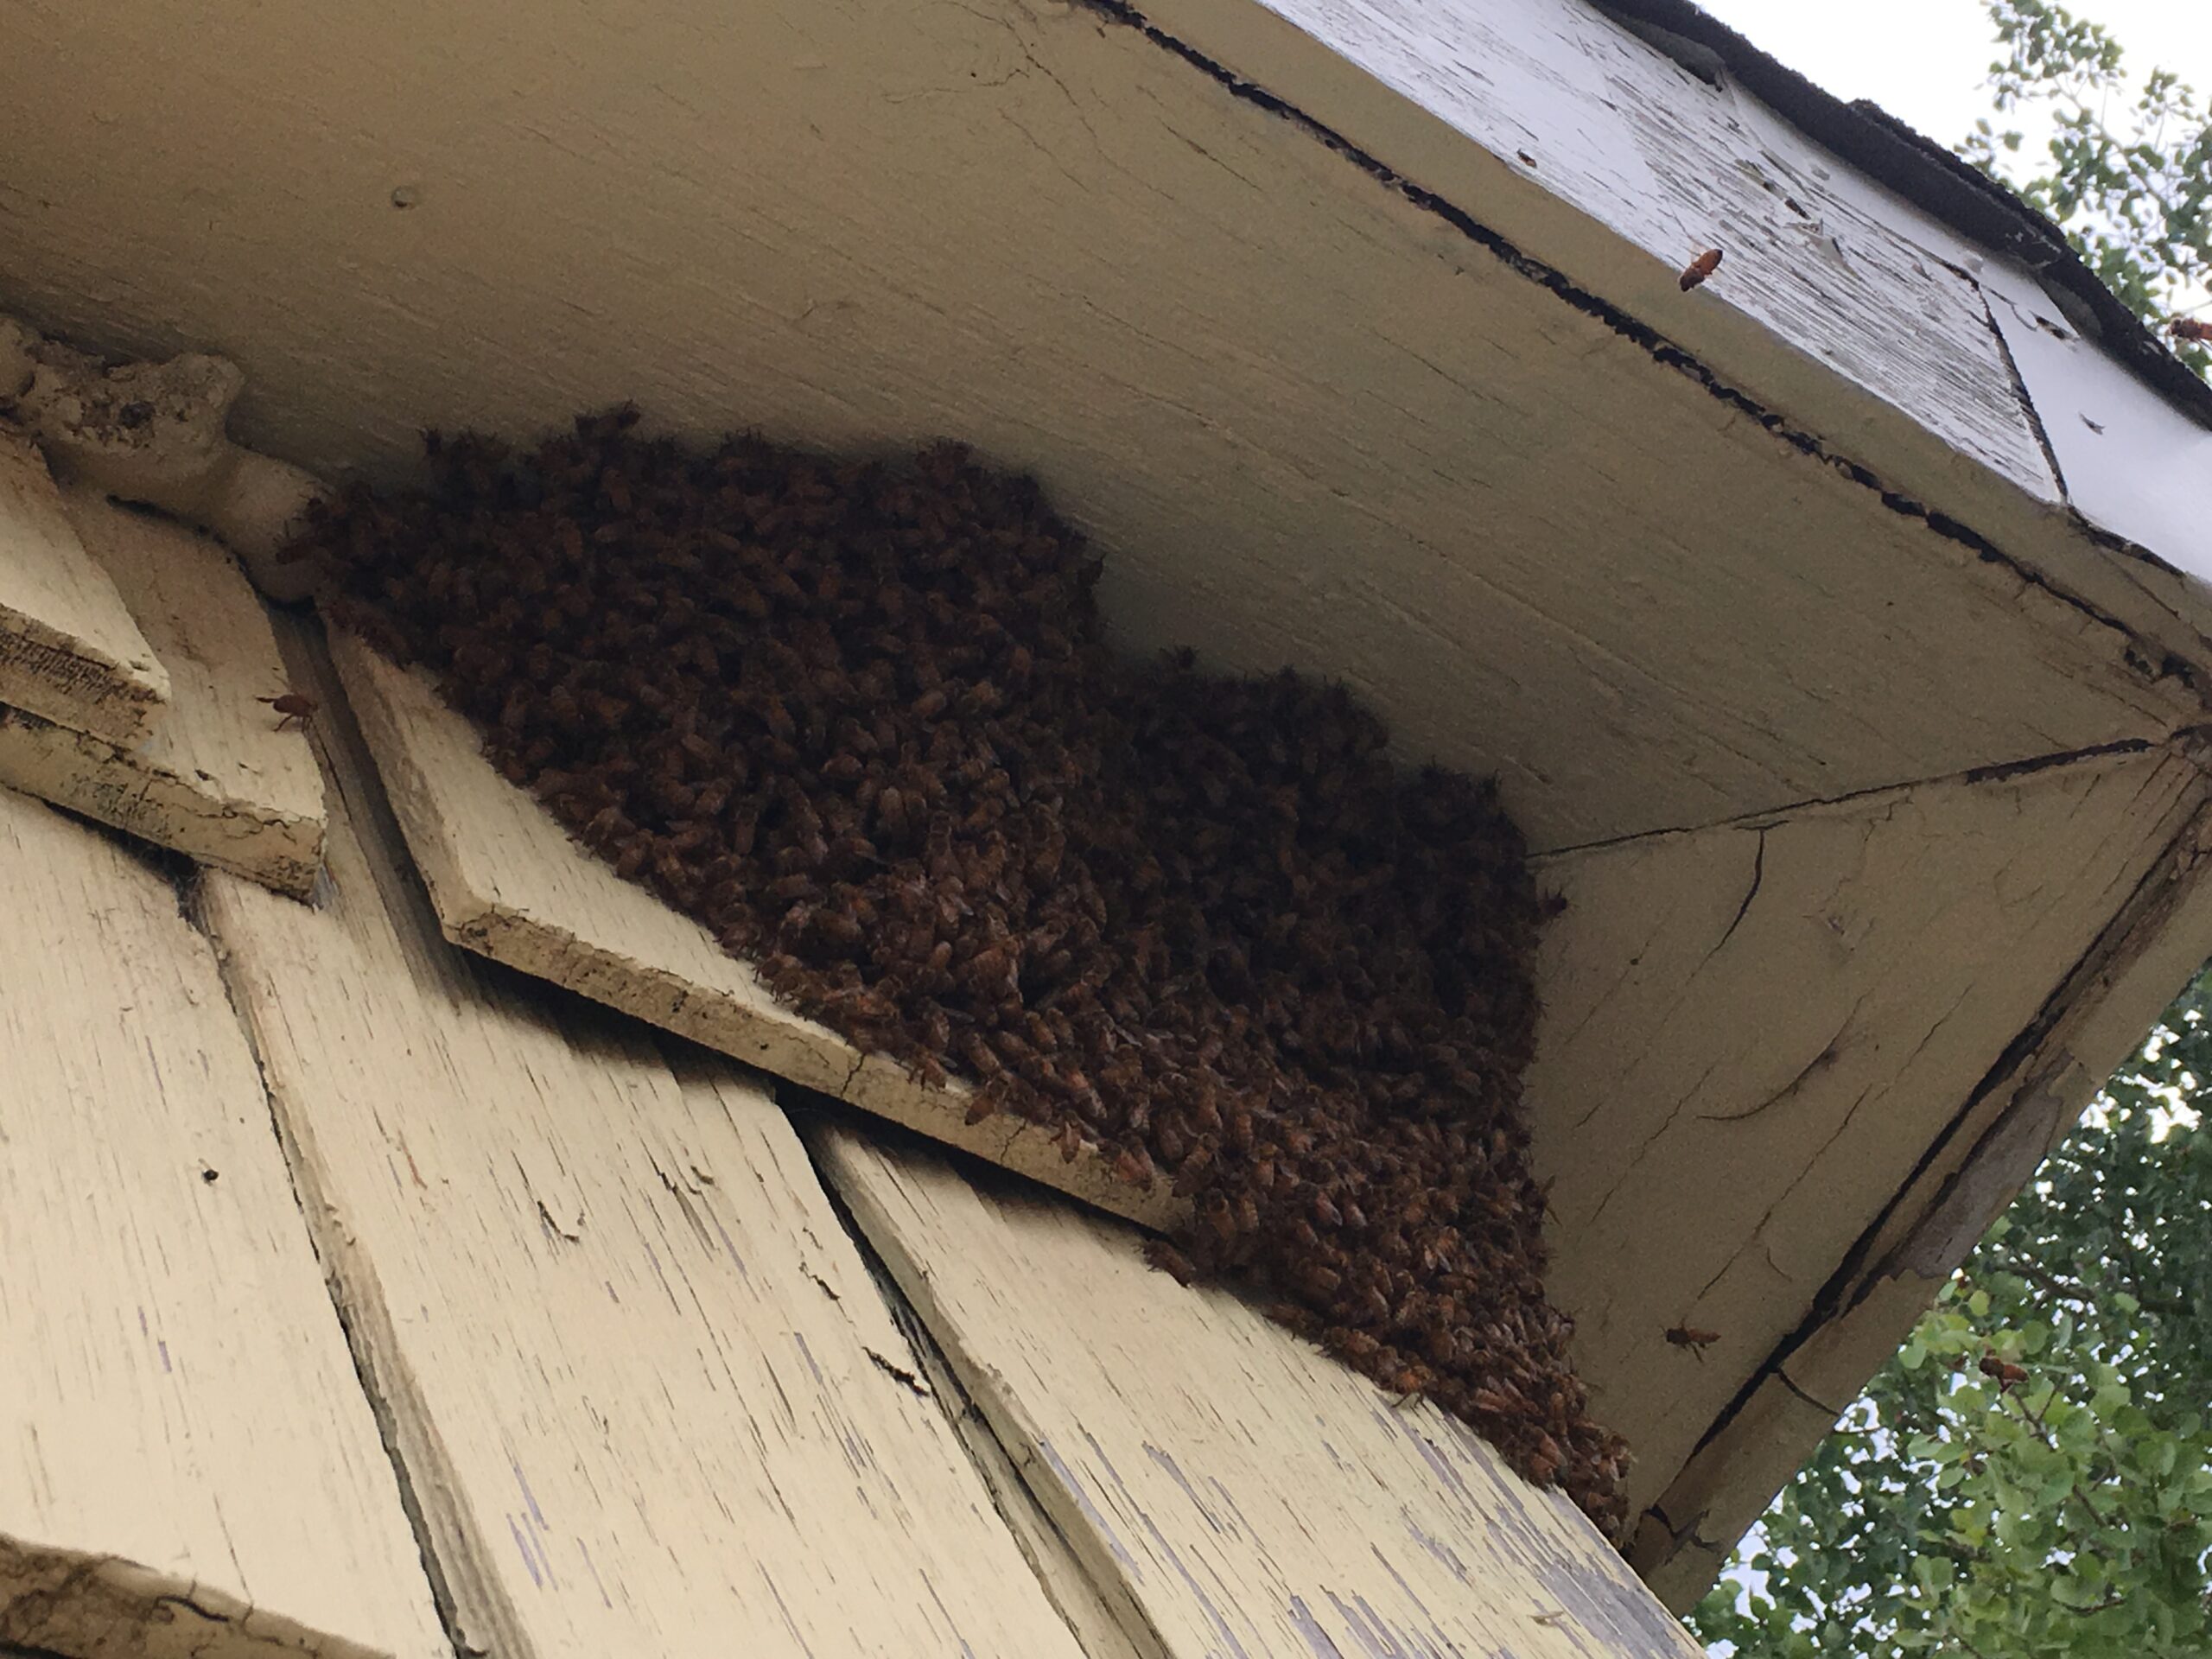 Swarm of bees on a roofing